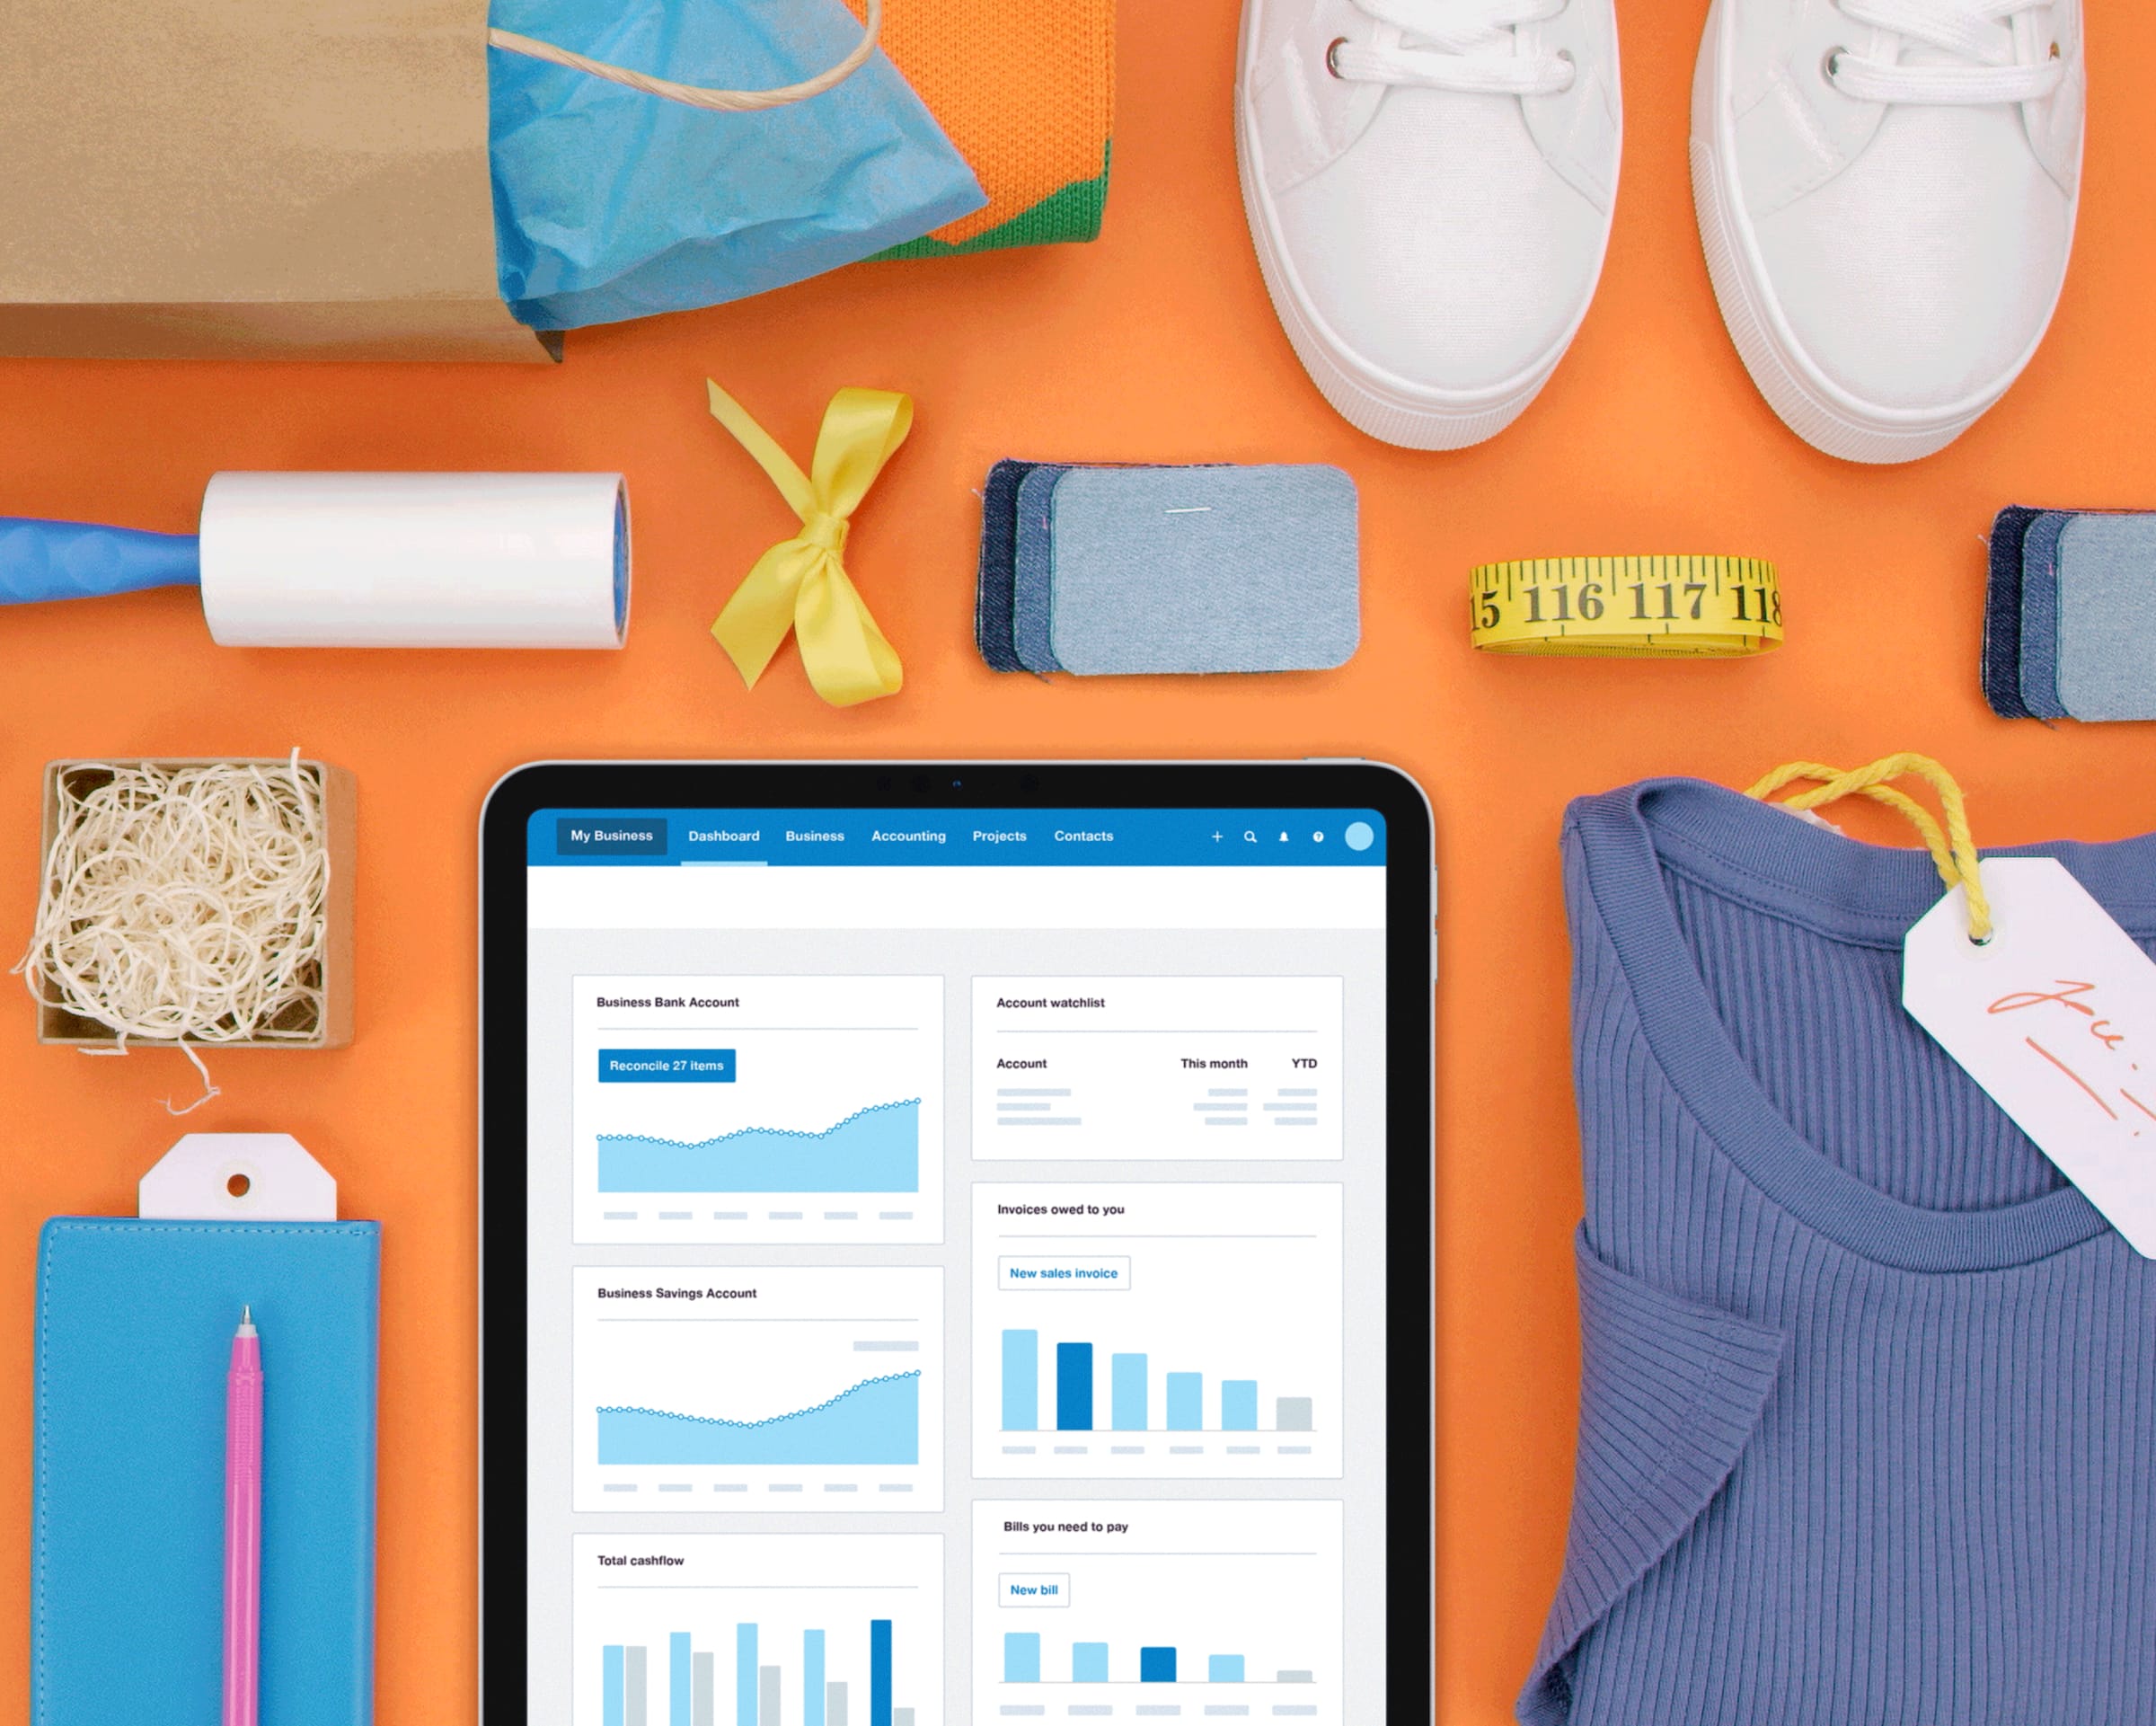 The Xero dashboard open on an iPad, surrounded by a shopping bag, and a range of new purchases.